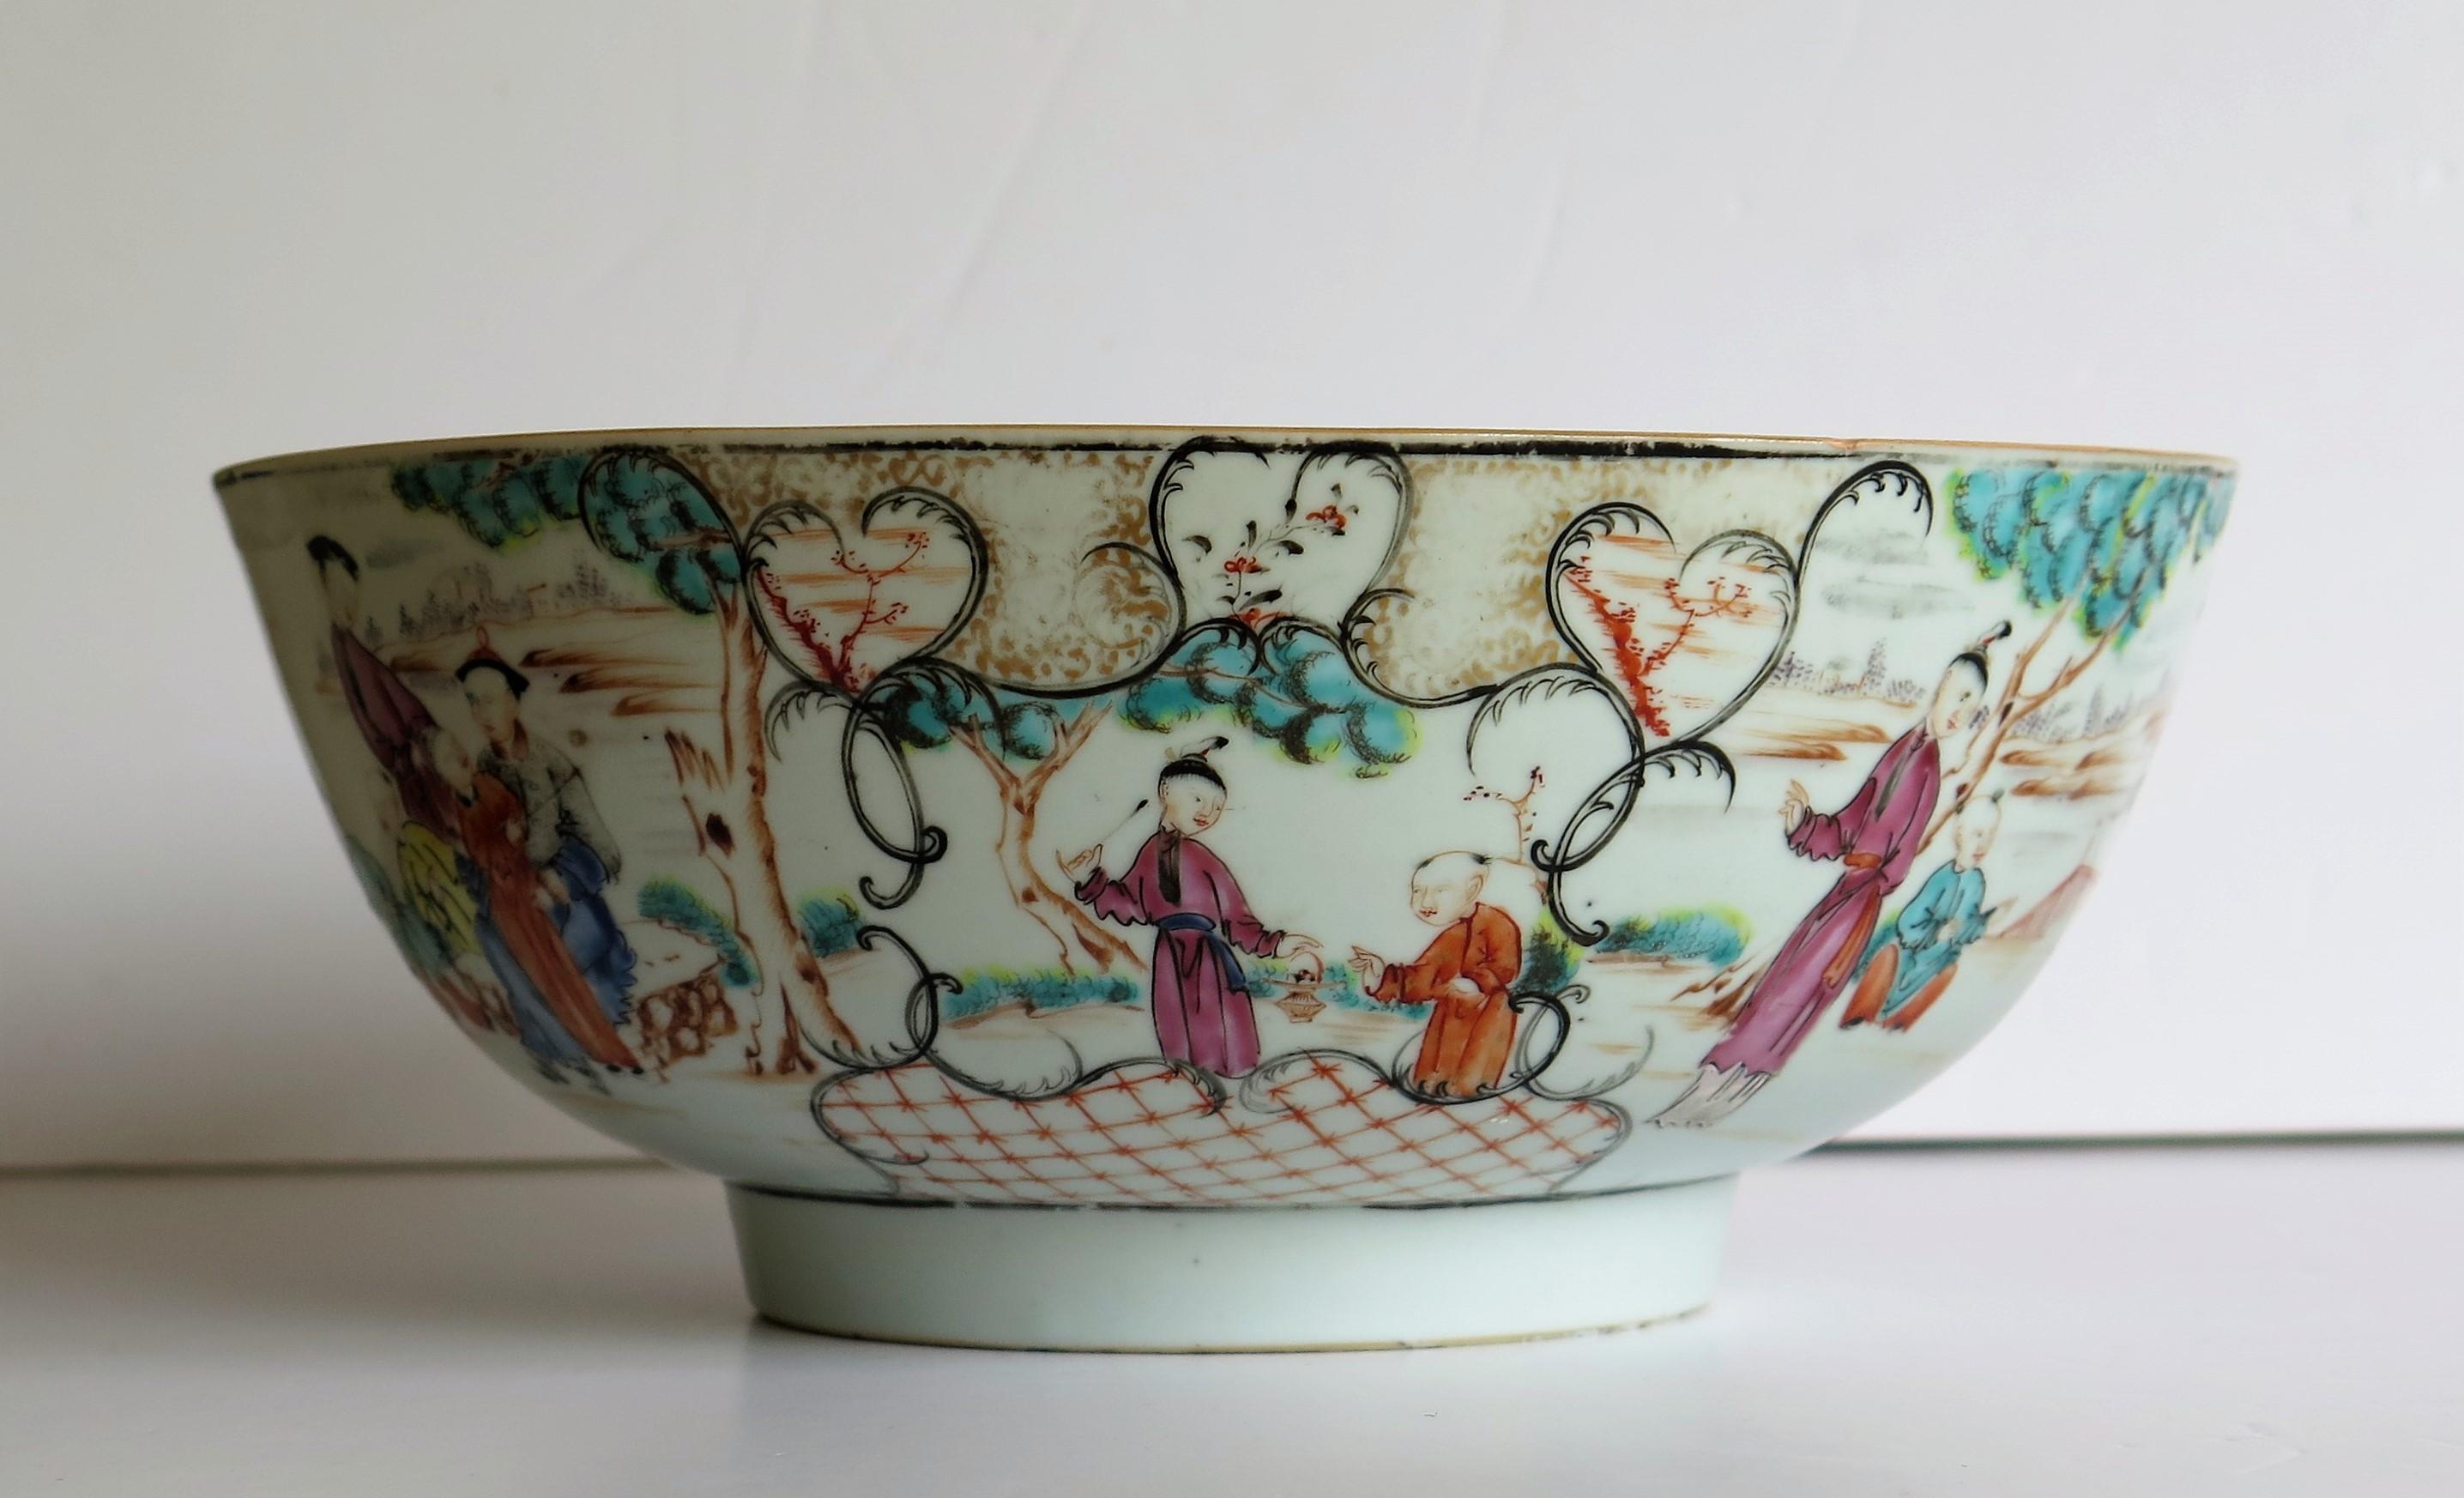 This is a finely hand painted Chinese export bowl from the 18th century, Qing dynasty, Qianlong period, 1736-1795. We date this piece to circa 1770.

It is beautifully hand decorated with different and continuous Chinese figure scenes in different